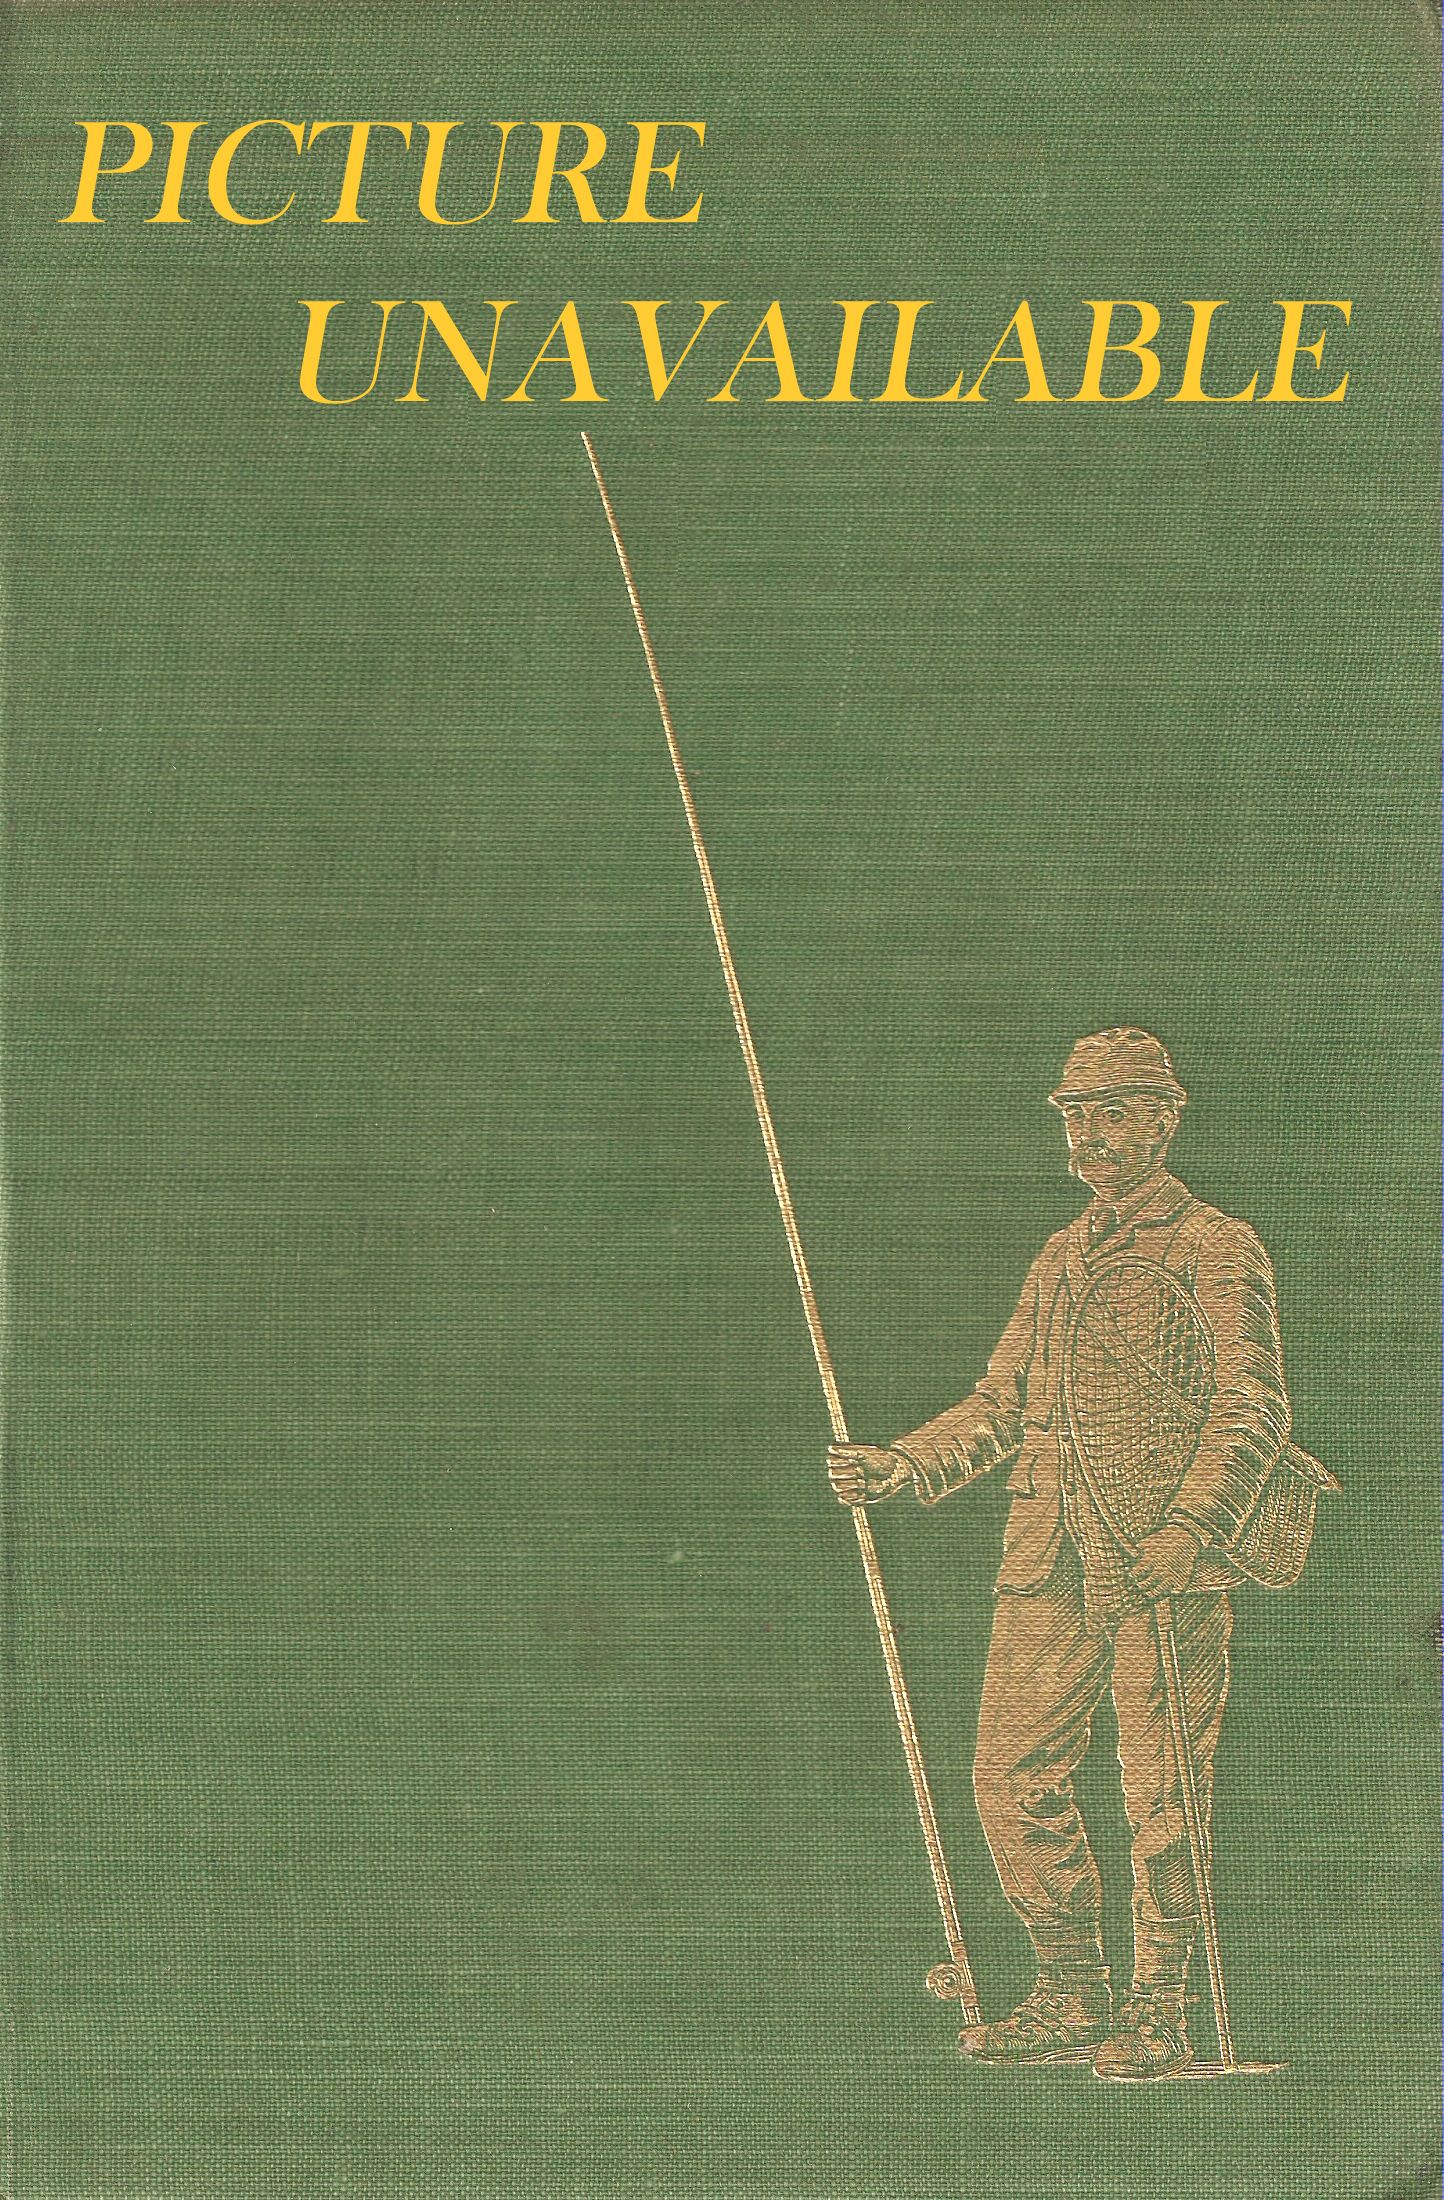 THE SECOND ANGLING TIMES BOOK. Edited by Peter Tombleson and Jack  Thorndike.